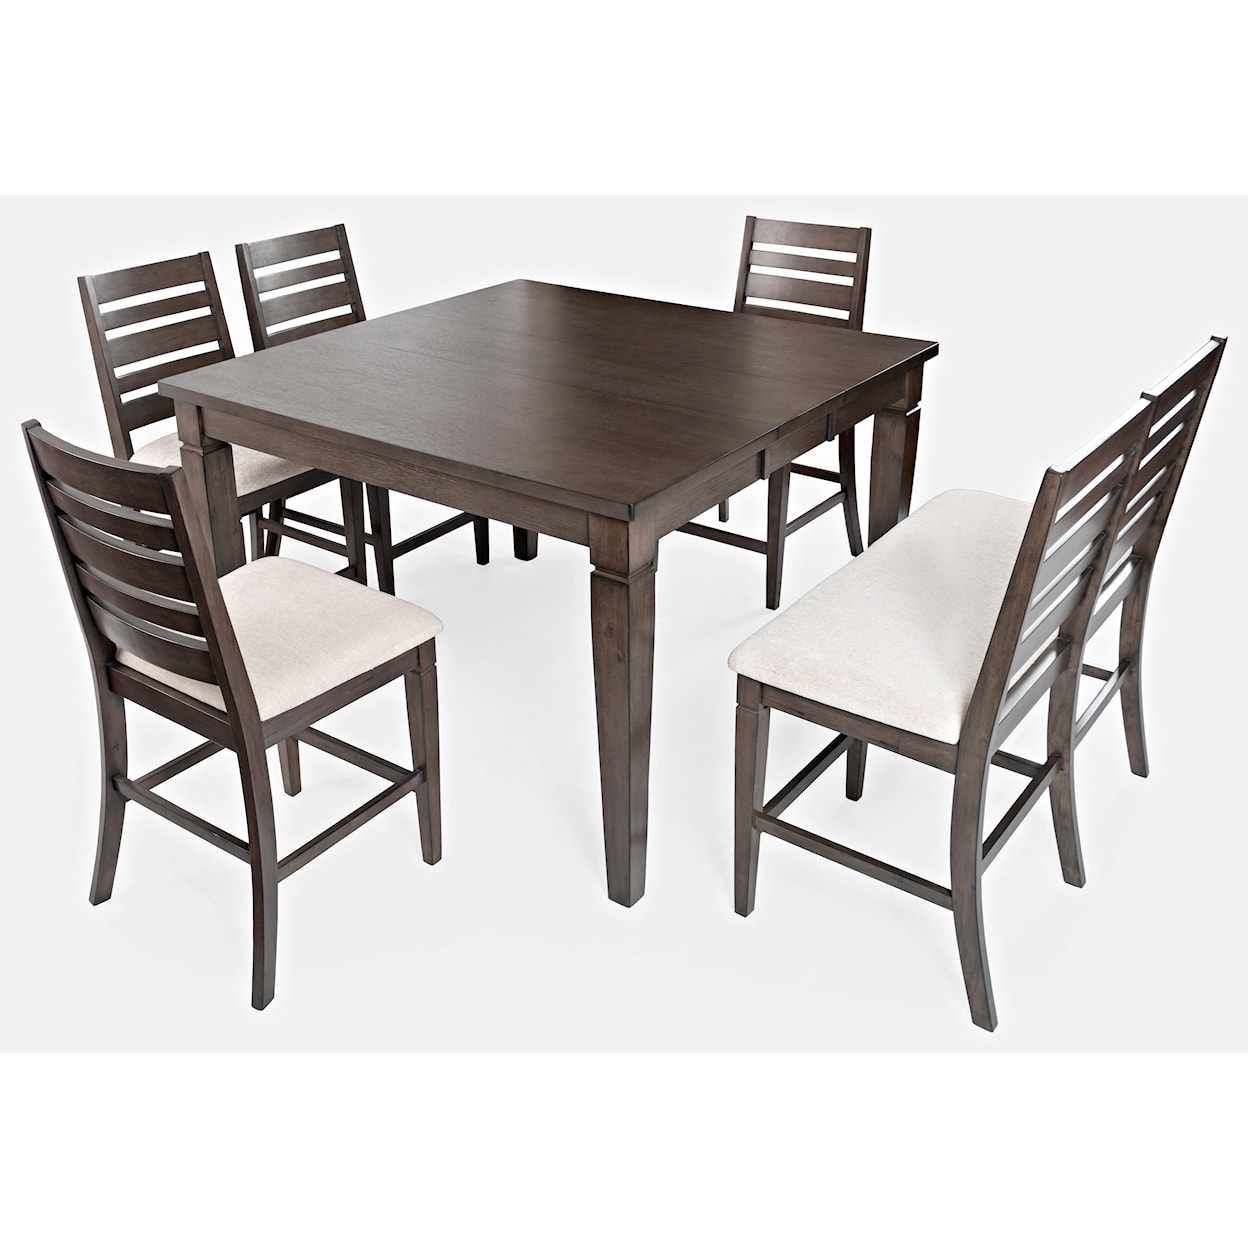 VFM Signature Lincoln Square Counter Height Table and Chair Set